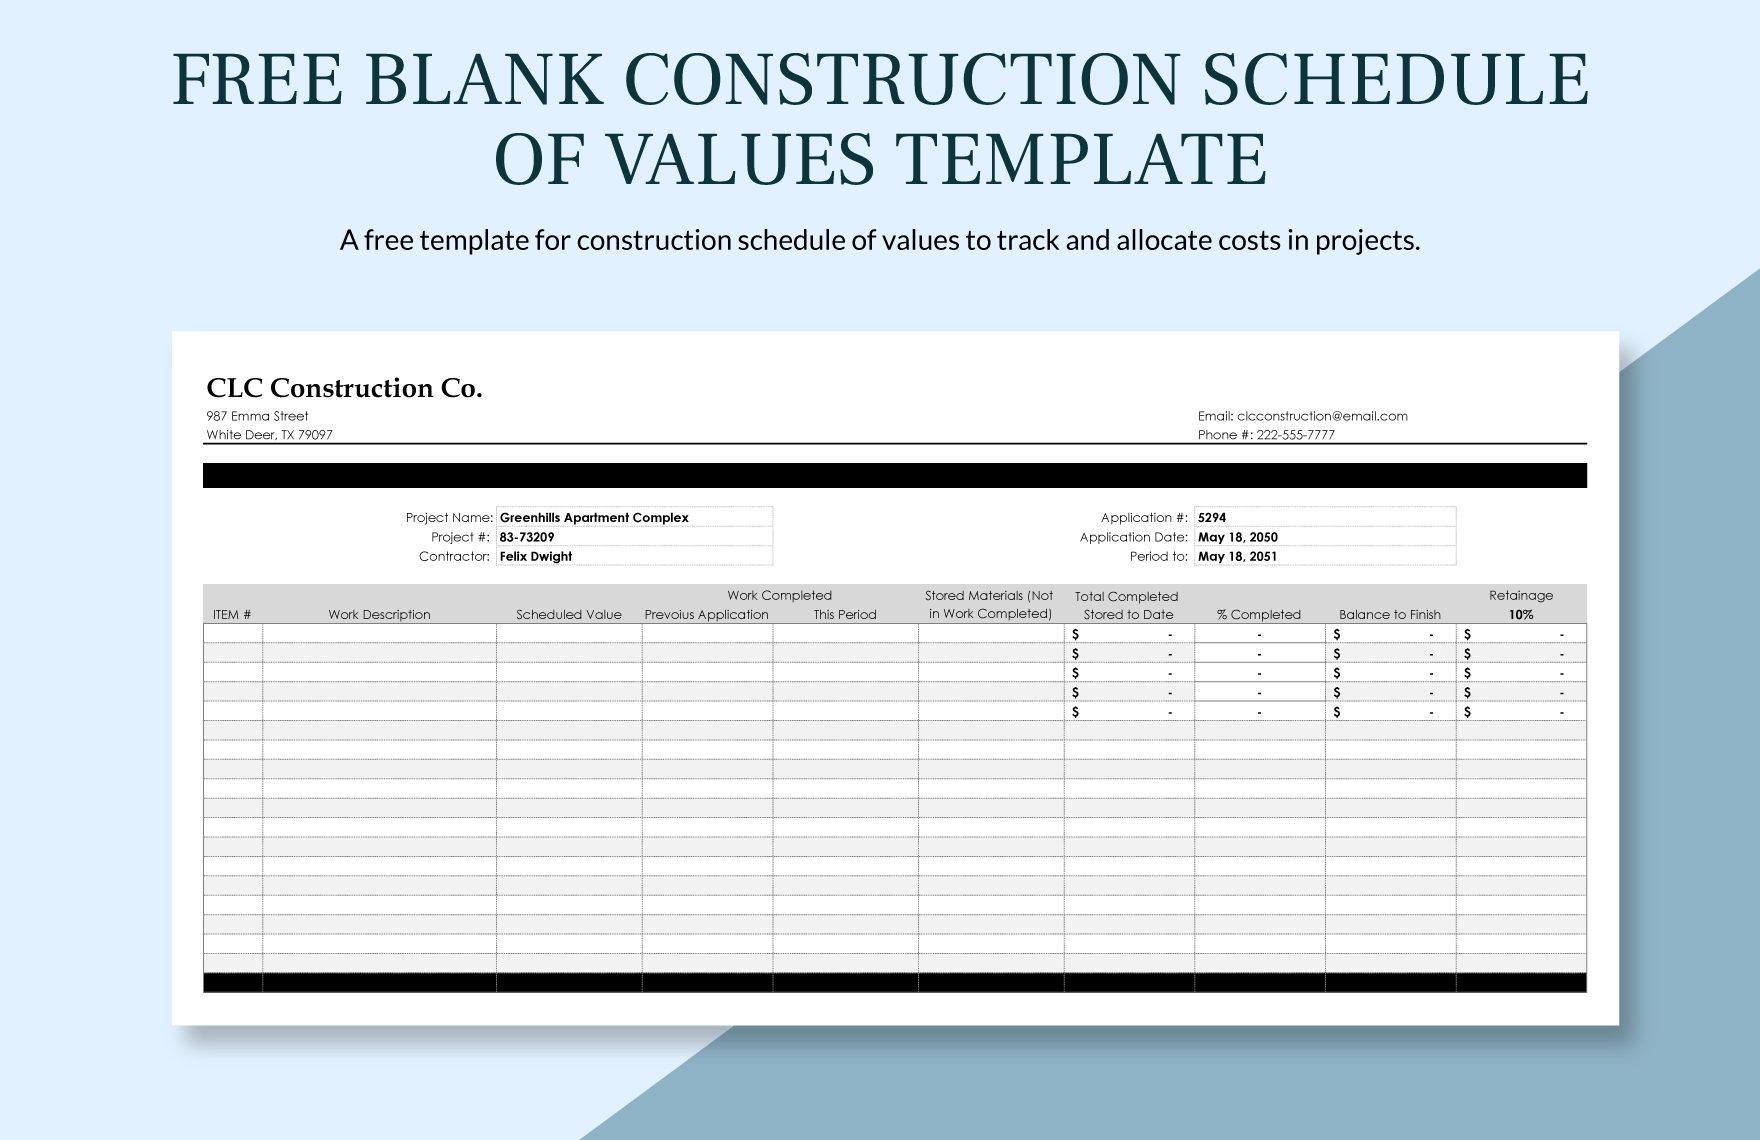 Blank Construction Schedule Of Values Template in Word, Google Docs, Excel, Google Sheets, Apple Pages